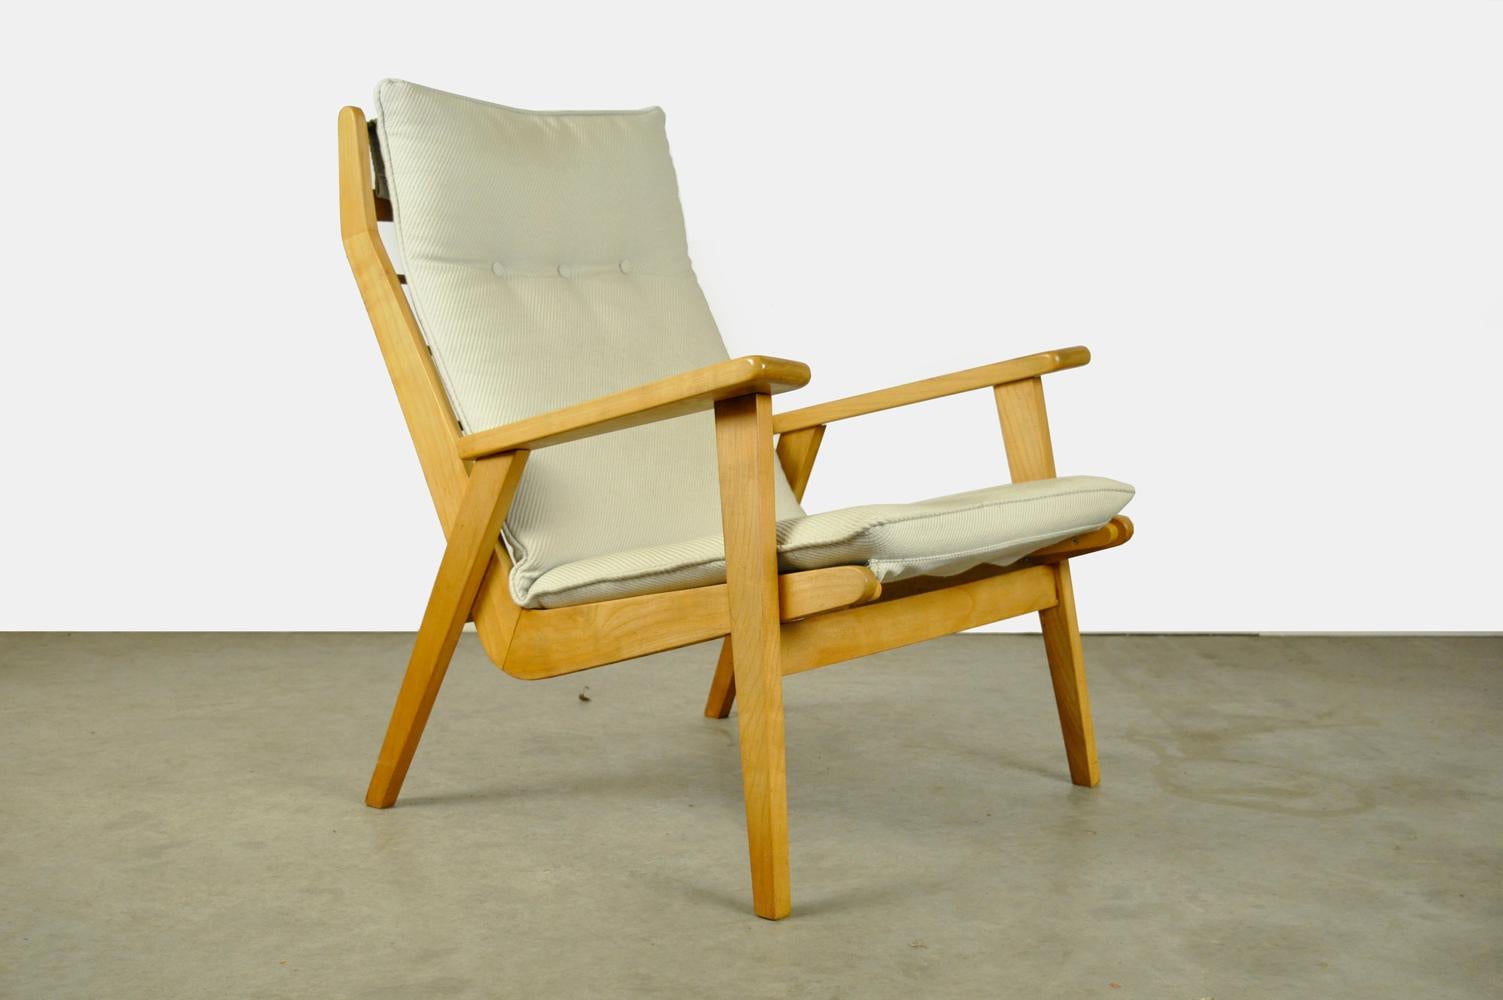 Vintage “Lotus” armchair designed by Rob Parry for Gelderland, 1960s Netherlands. The design classic from the Netherlands has a beech wooden frame with a loose cushion in off-white upholstery. Rob Parry (1925-2023) was a student of Gerrit Rietveld. 